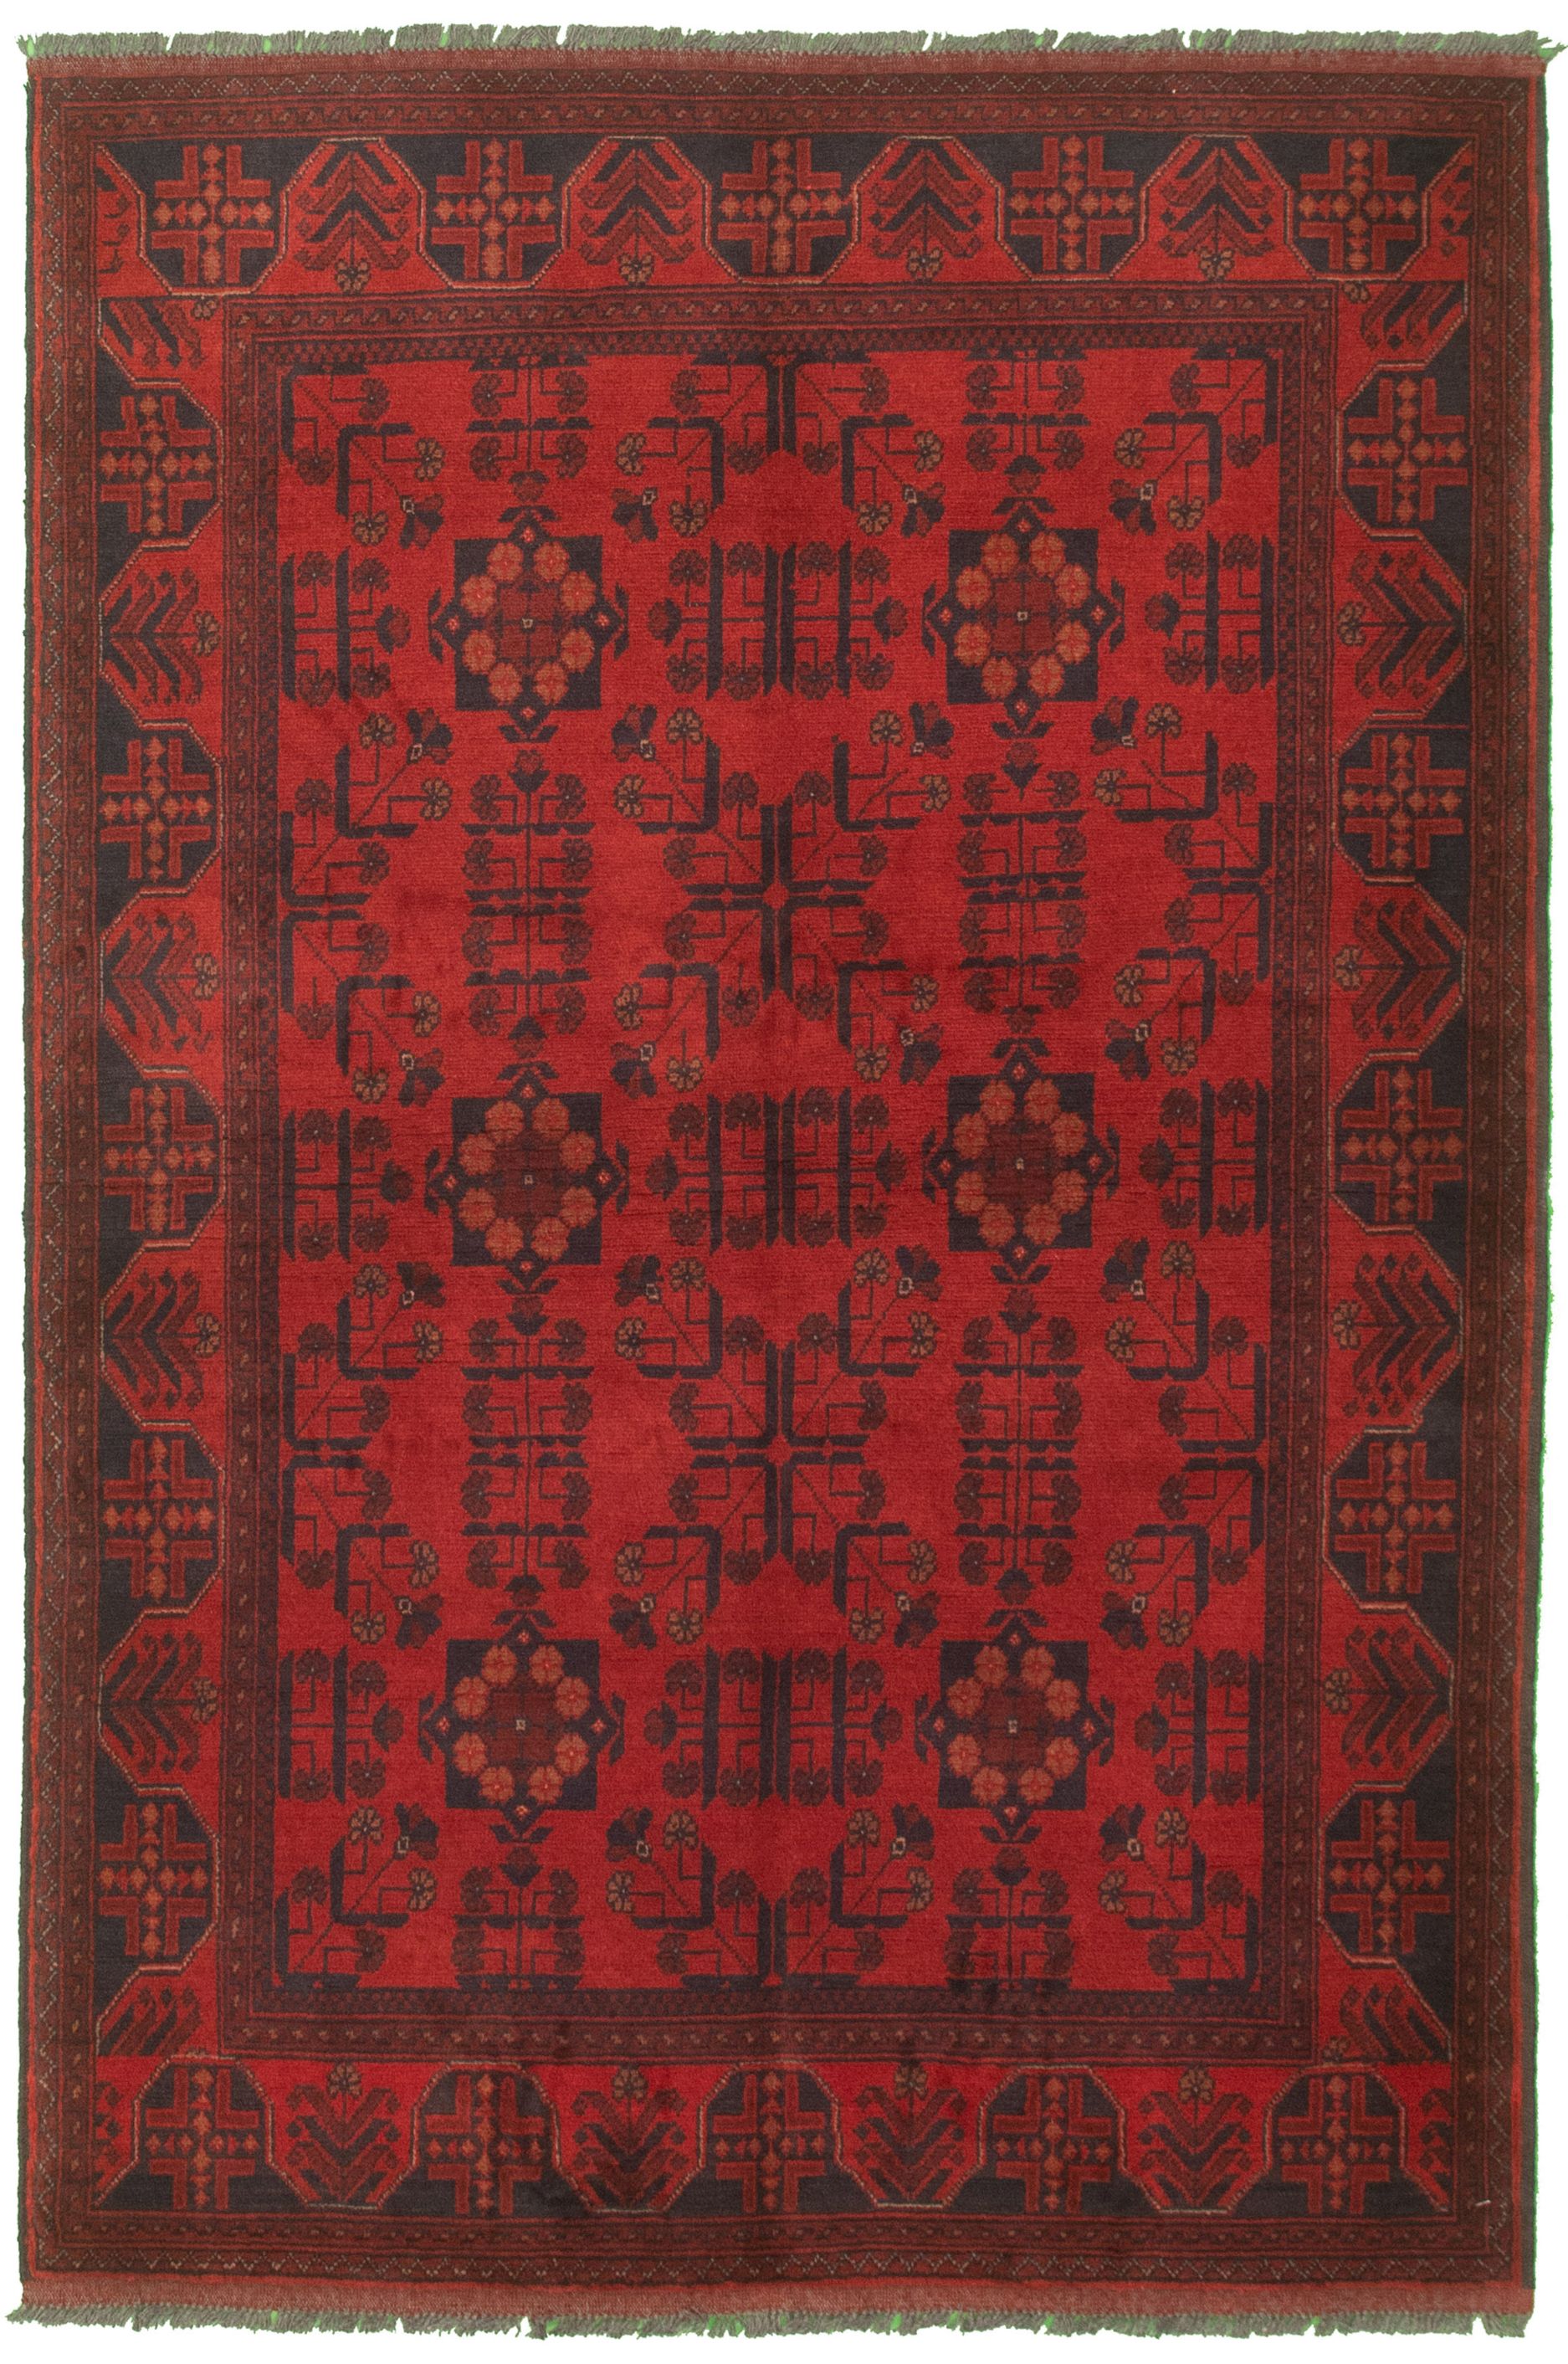 Hand-knotted Finest Khal Mohammadi Red Wool Rug 4'3" x 6'5"  Size: 4'3" x 6'5"  